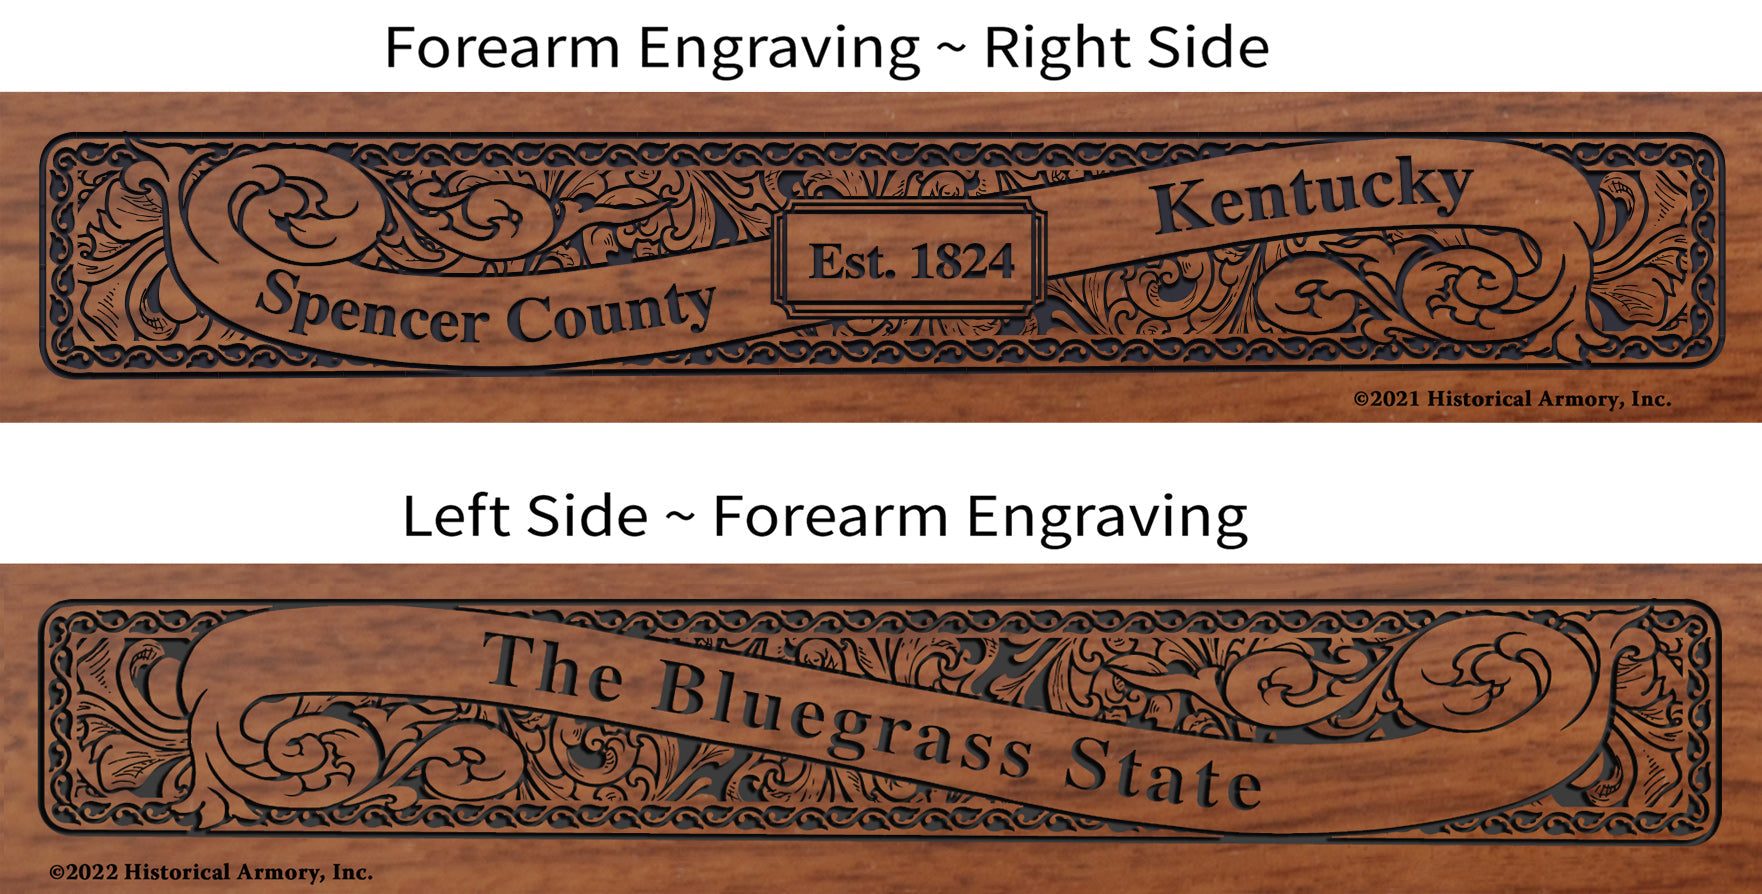 Spencer County Kentucky Engraved Rifle Forearm